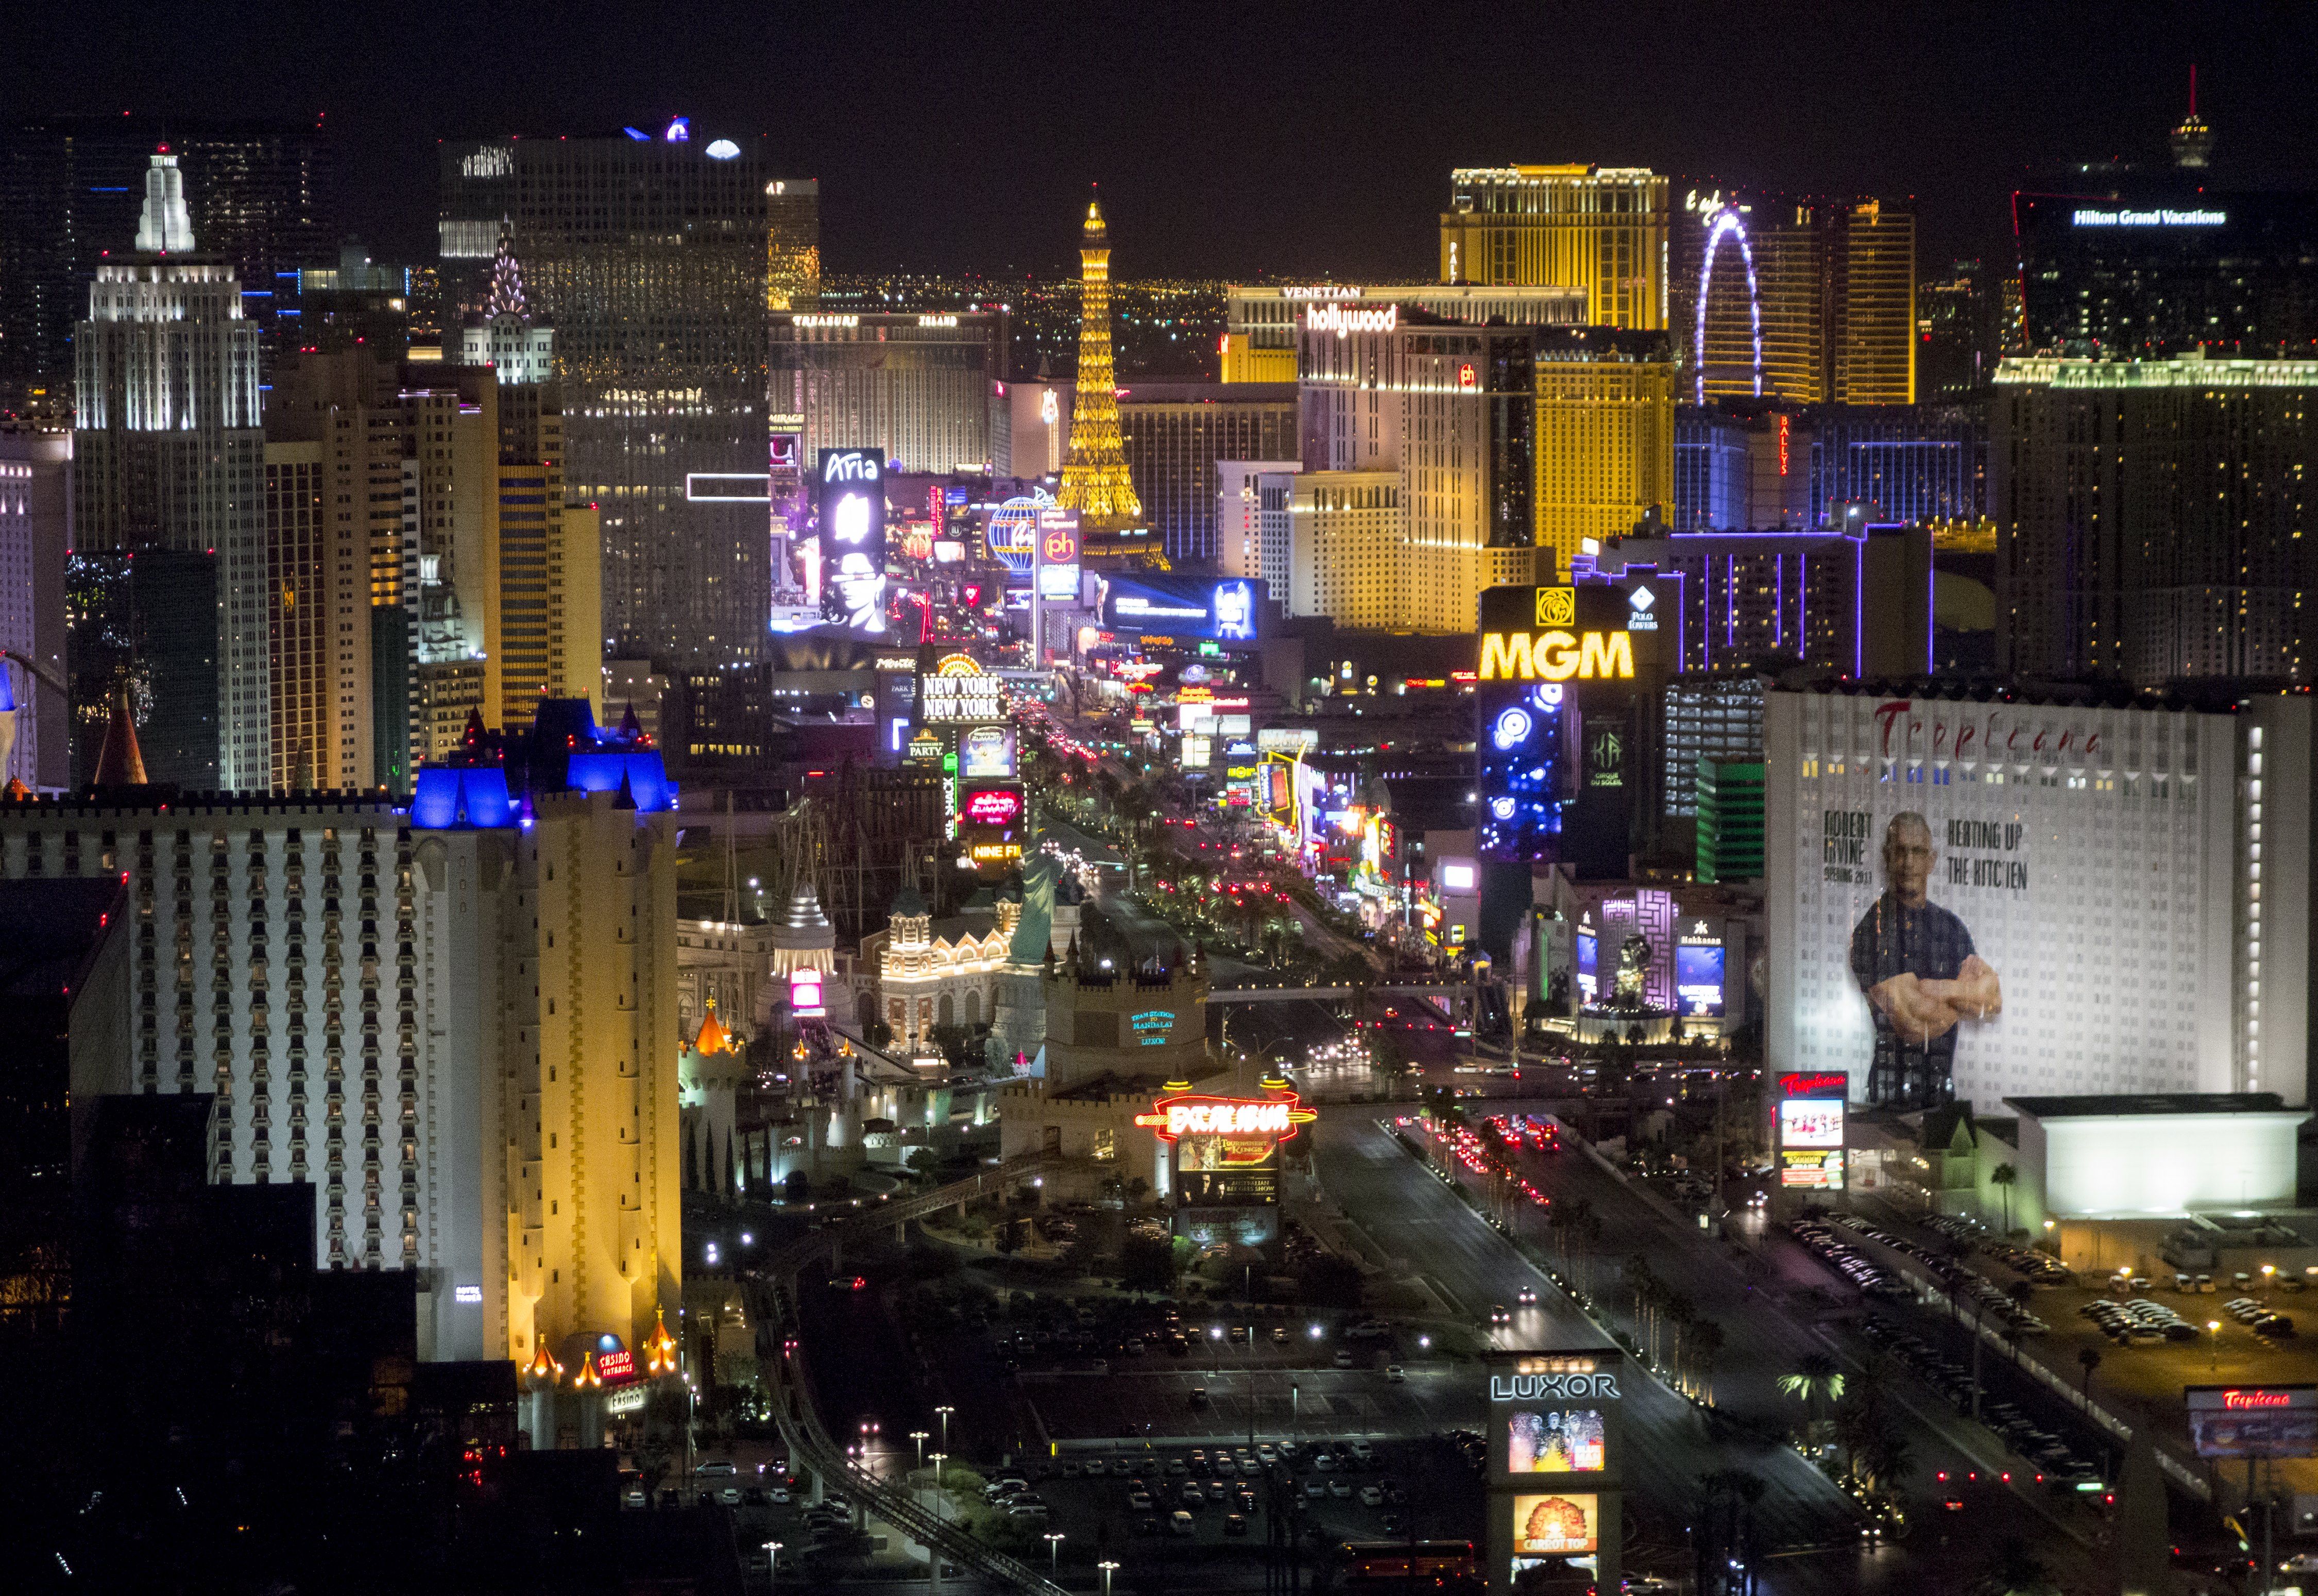 Las Vegas police blame spike in crime on cheap hotel deals amid pandemic | The Independent